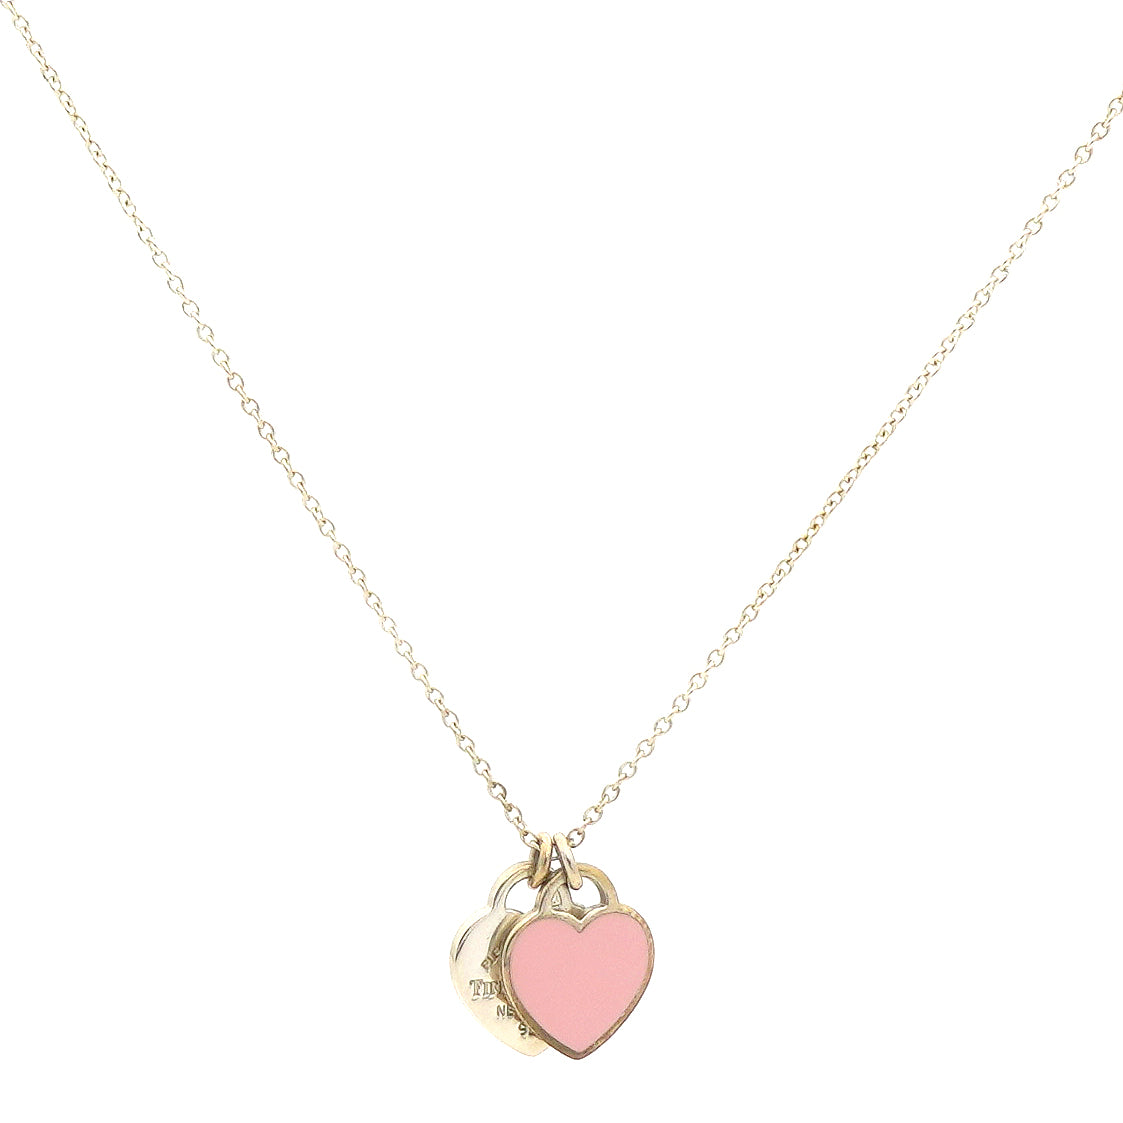 Tiffany & Co. Pink Double Heart Pendant Necklace | Heart pendant necklace, Heart  pendant, Tiffany & co.